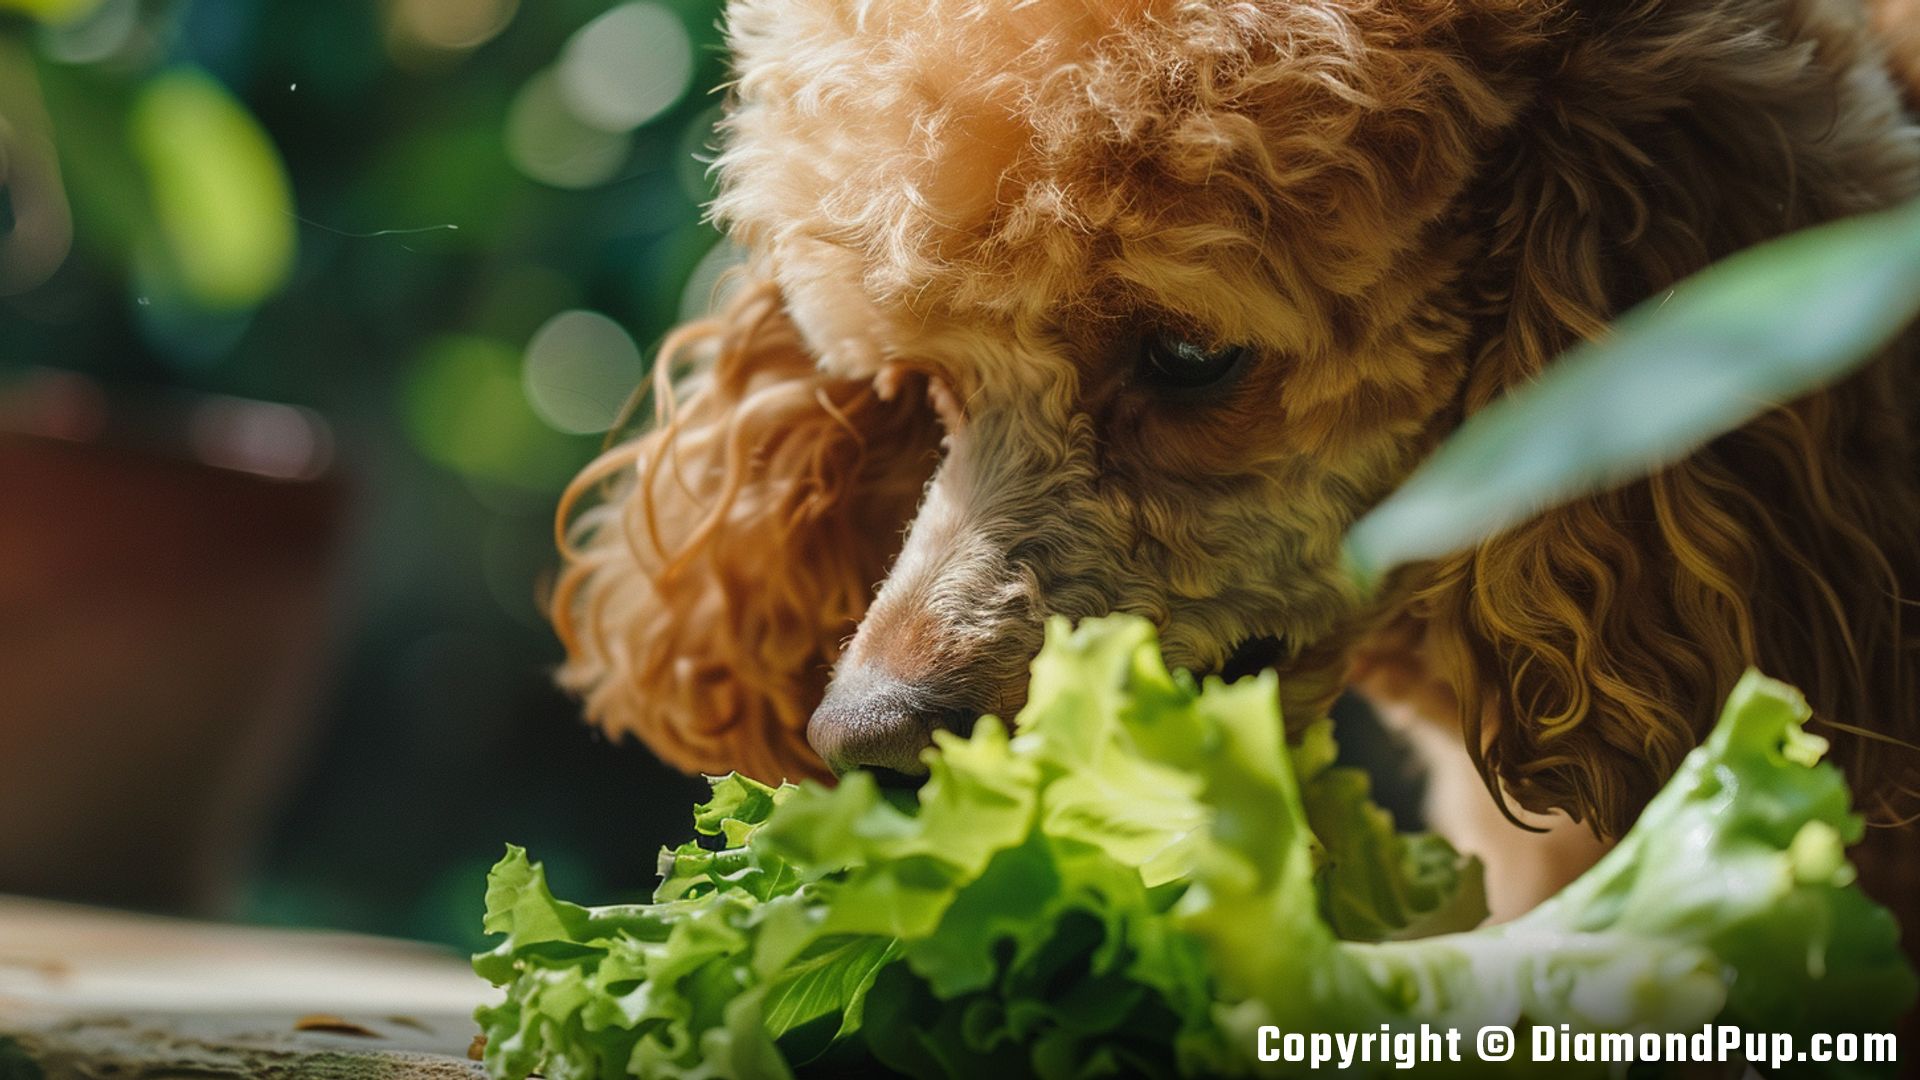 Photograph of Poodle Snacking on Lettuce